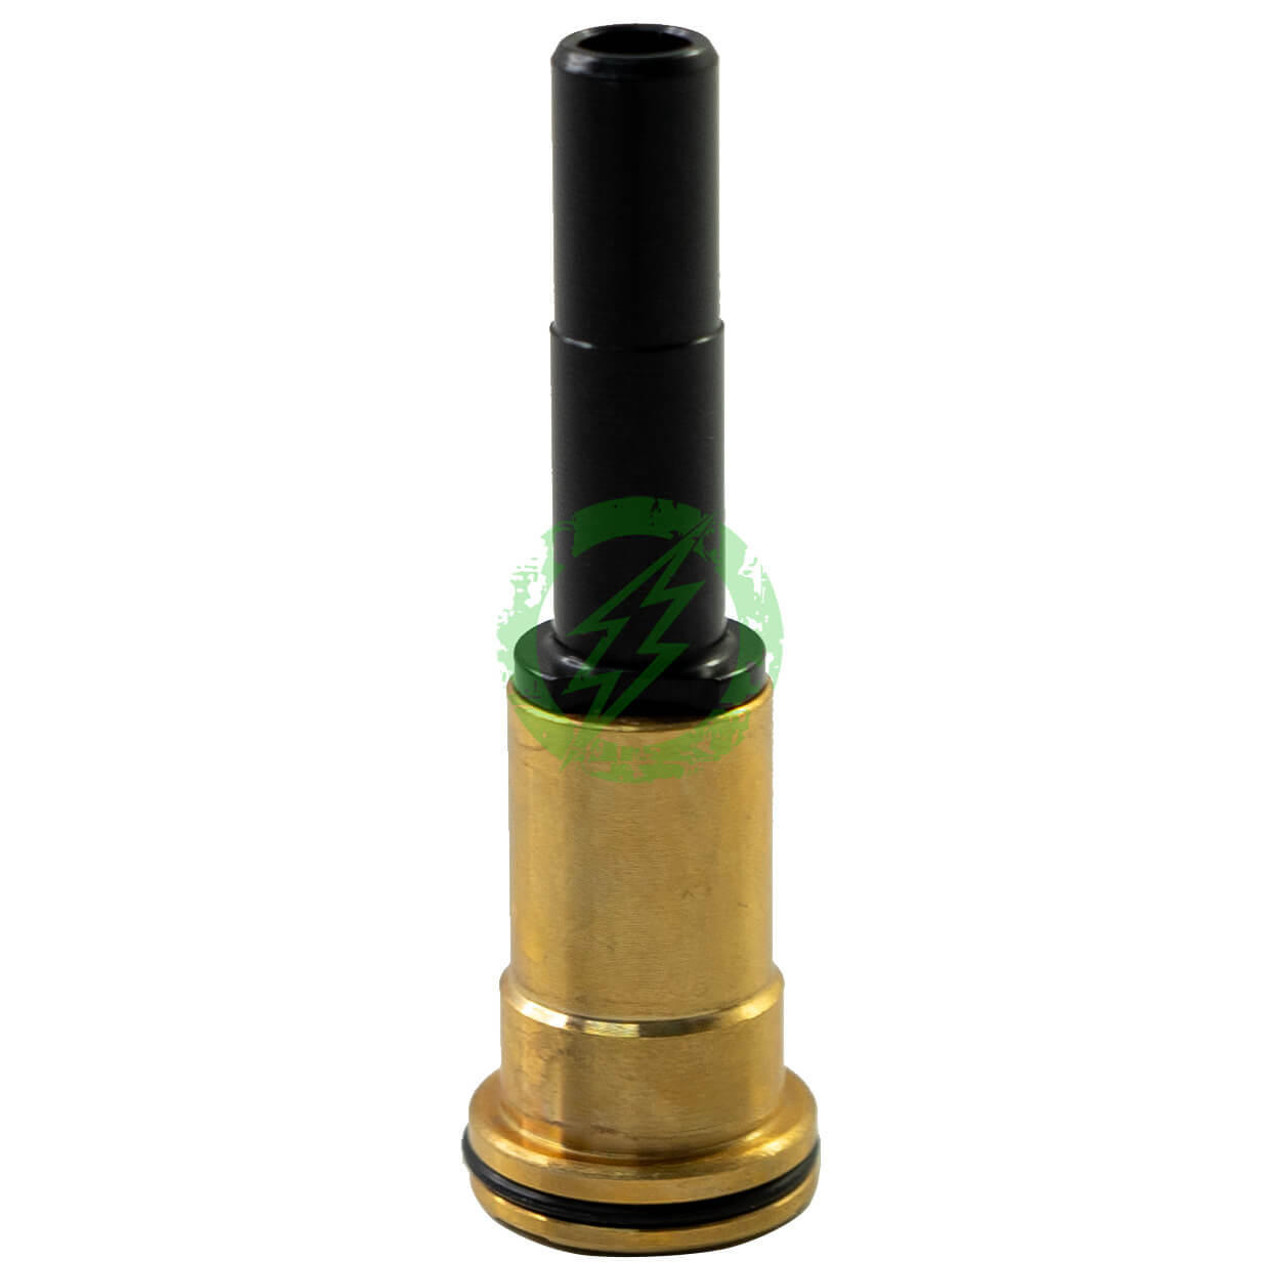  Wolverine Airsoft GEN 2 INFERNO Nozzle Assembly 